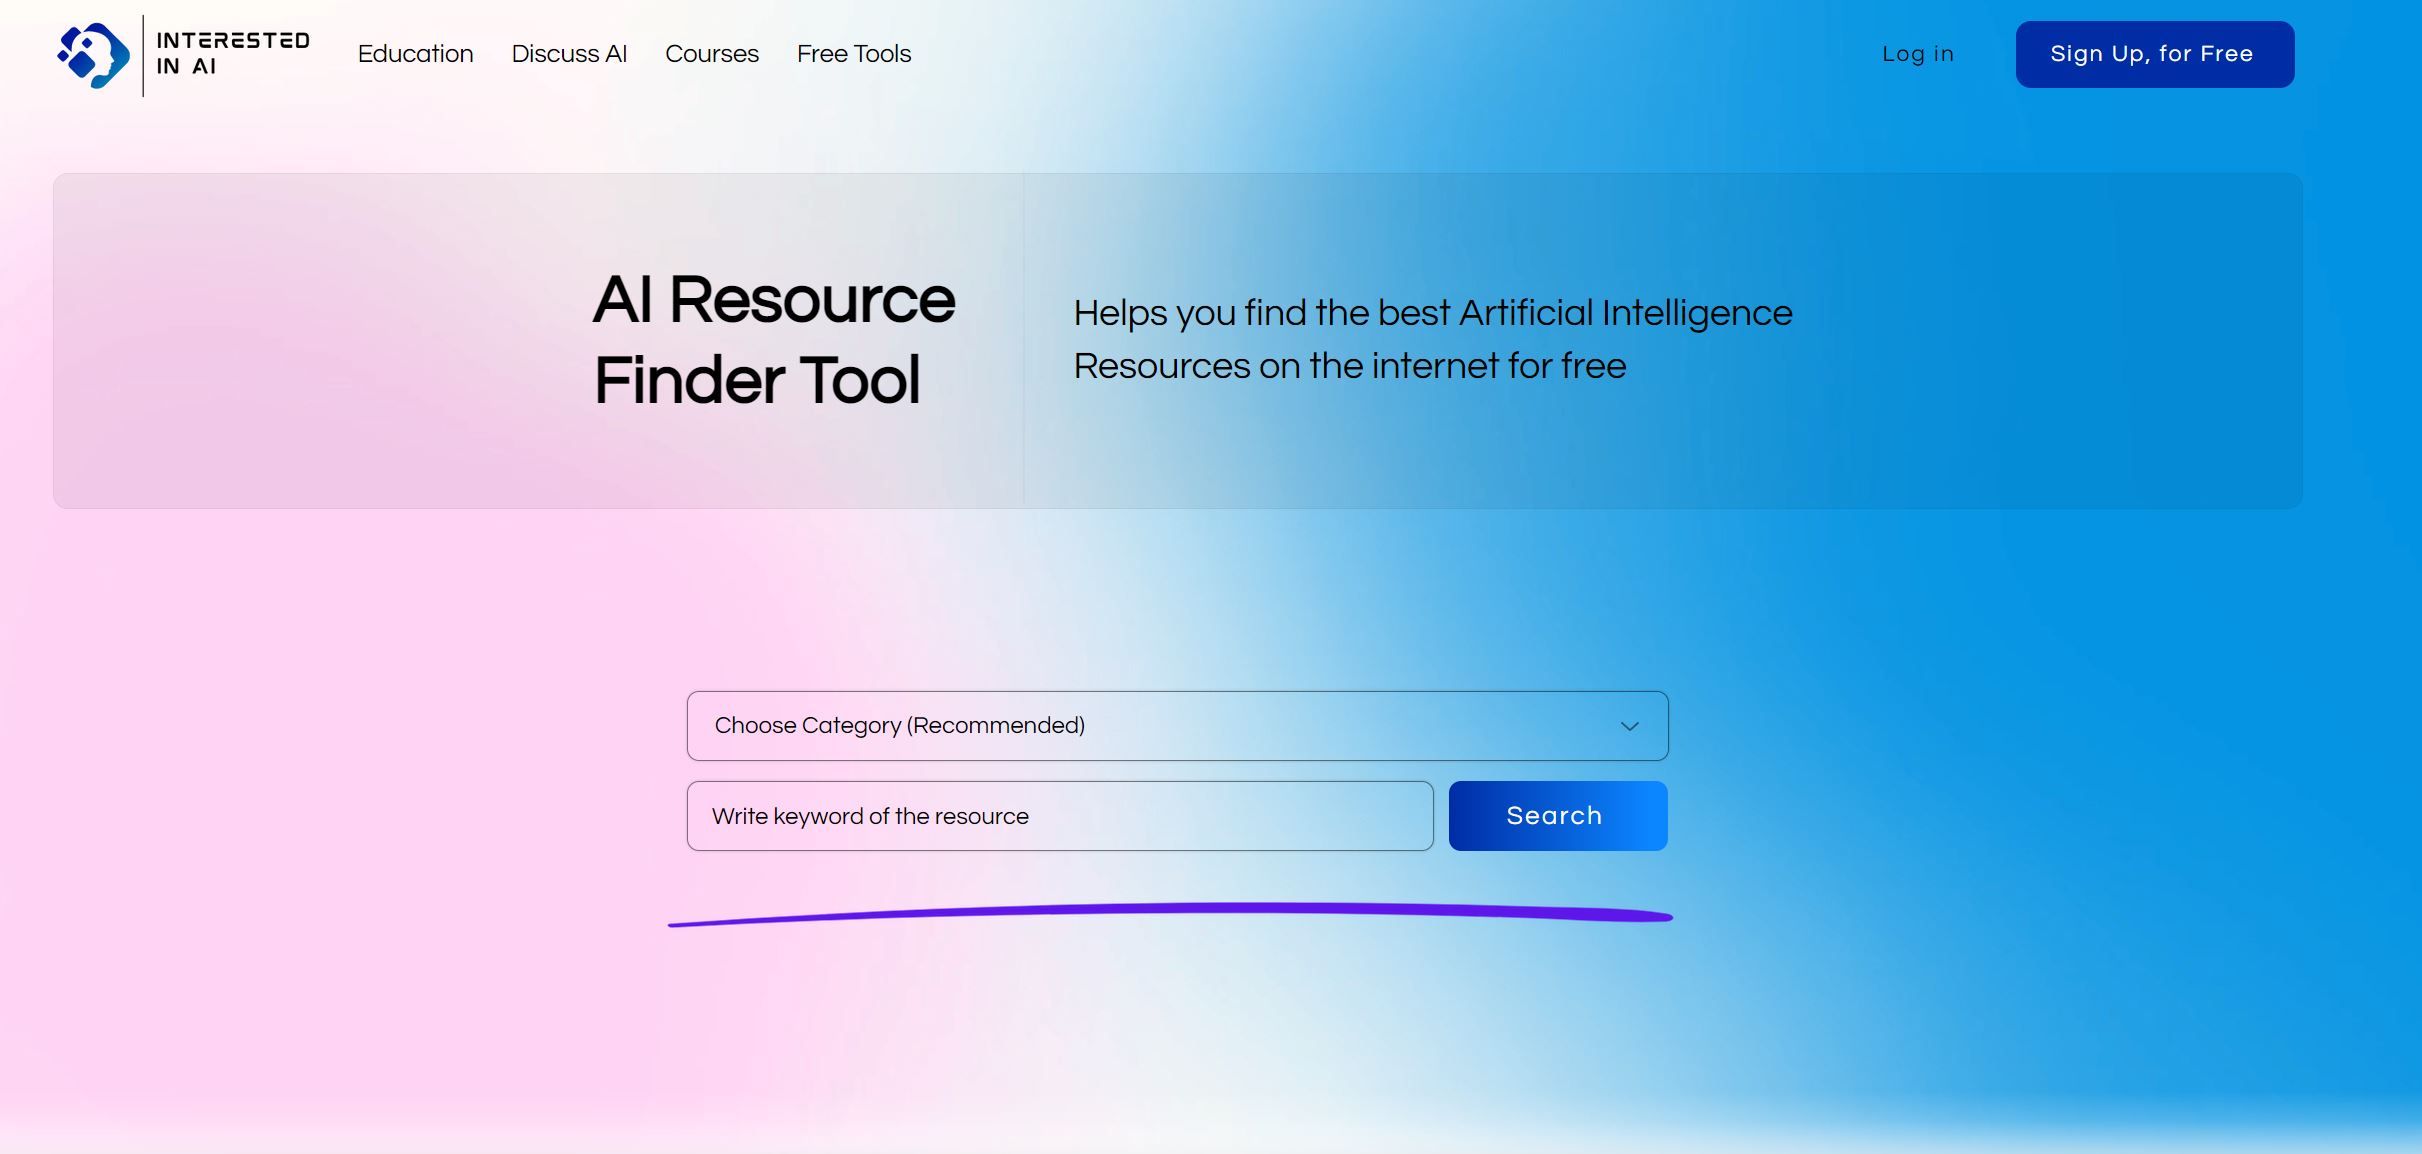 AI Resource Finder Tool